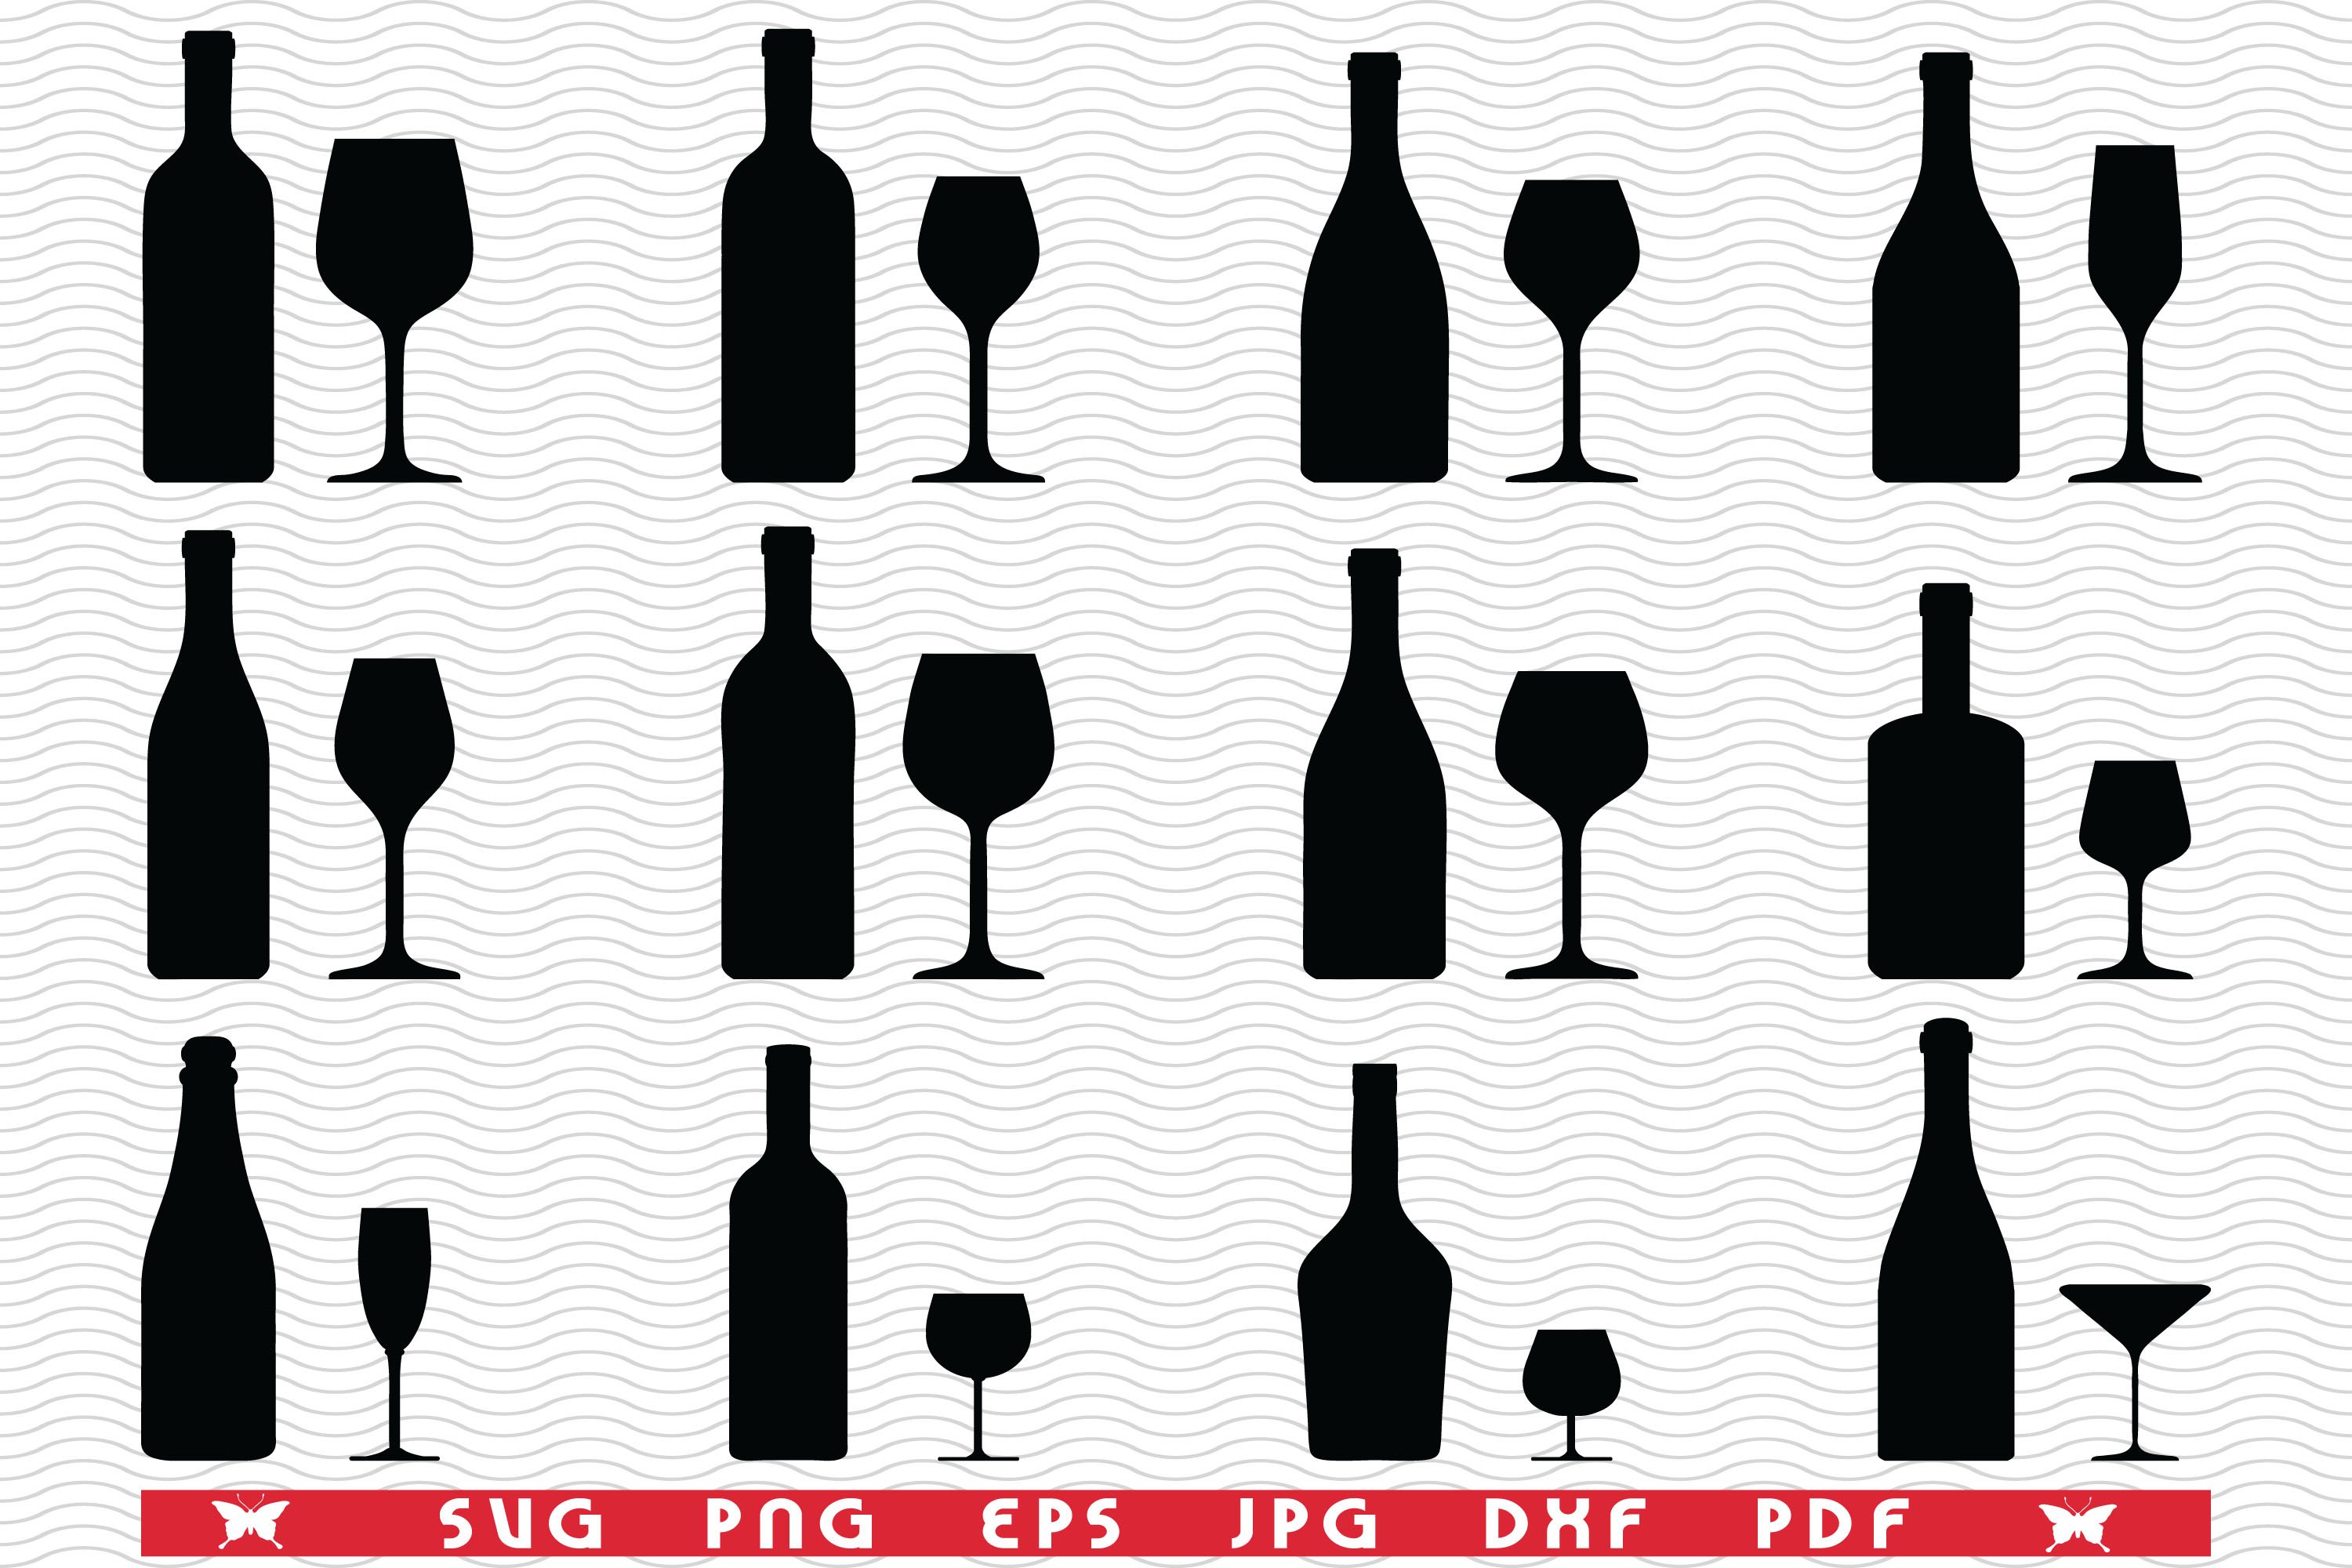 SVG Wine Bottles Glasses,Silhouettes cover image.